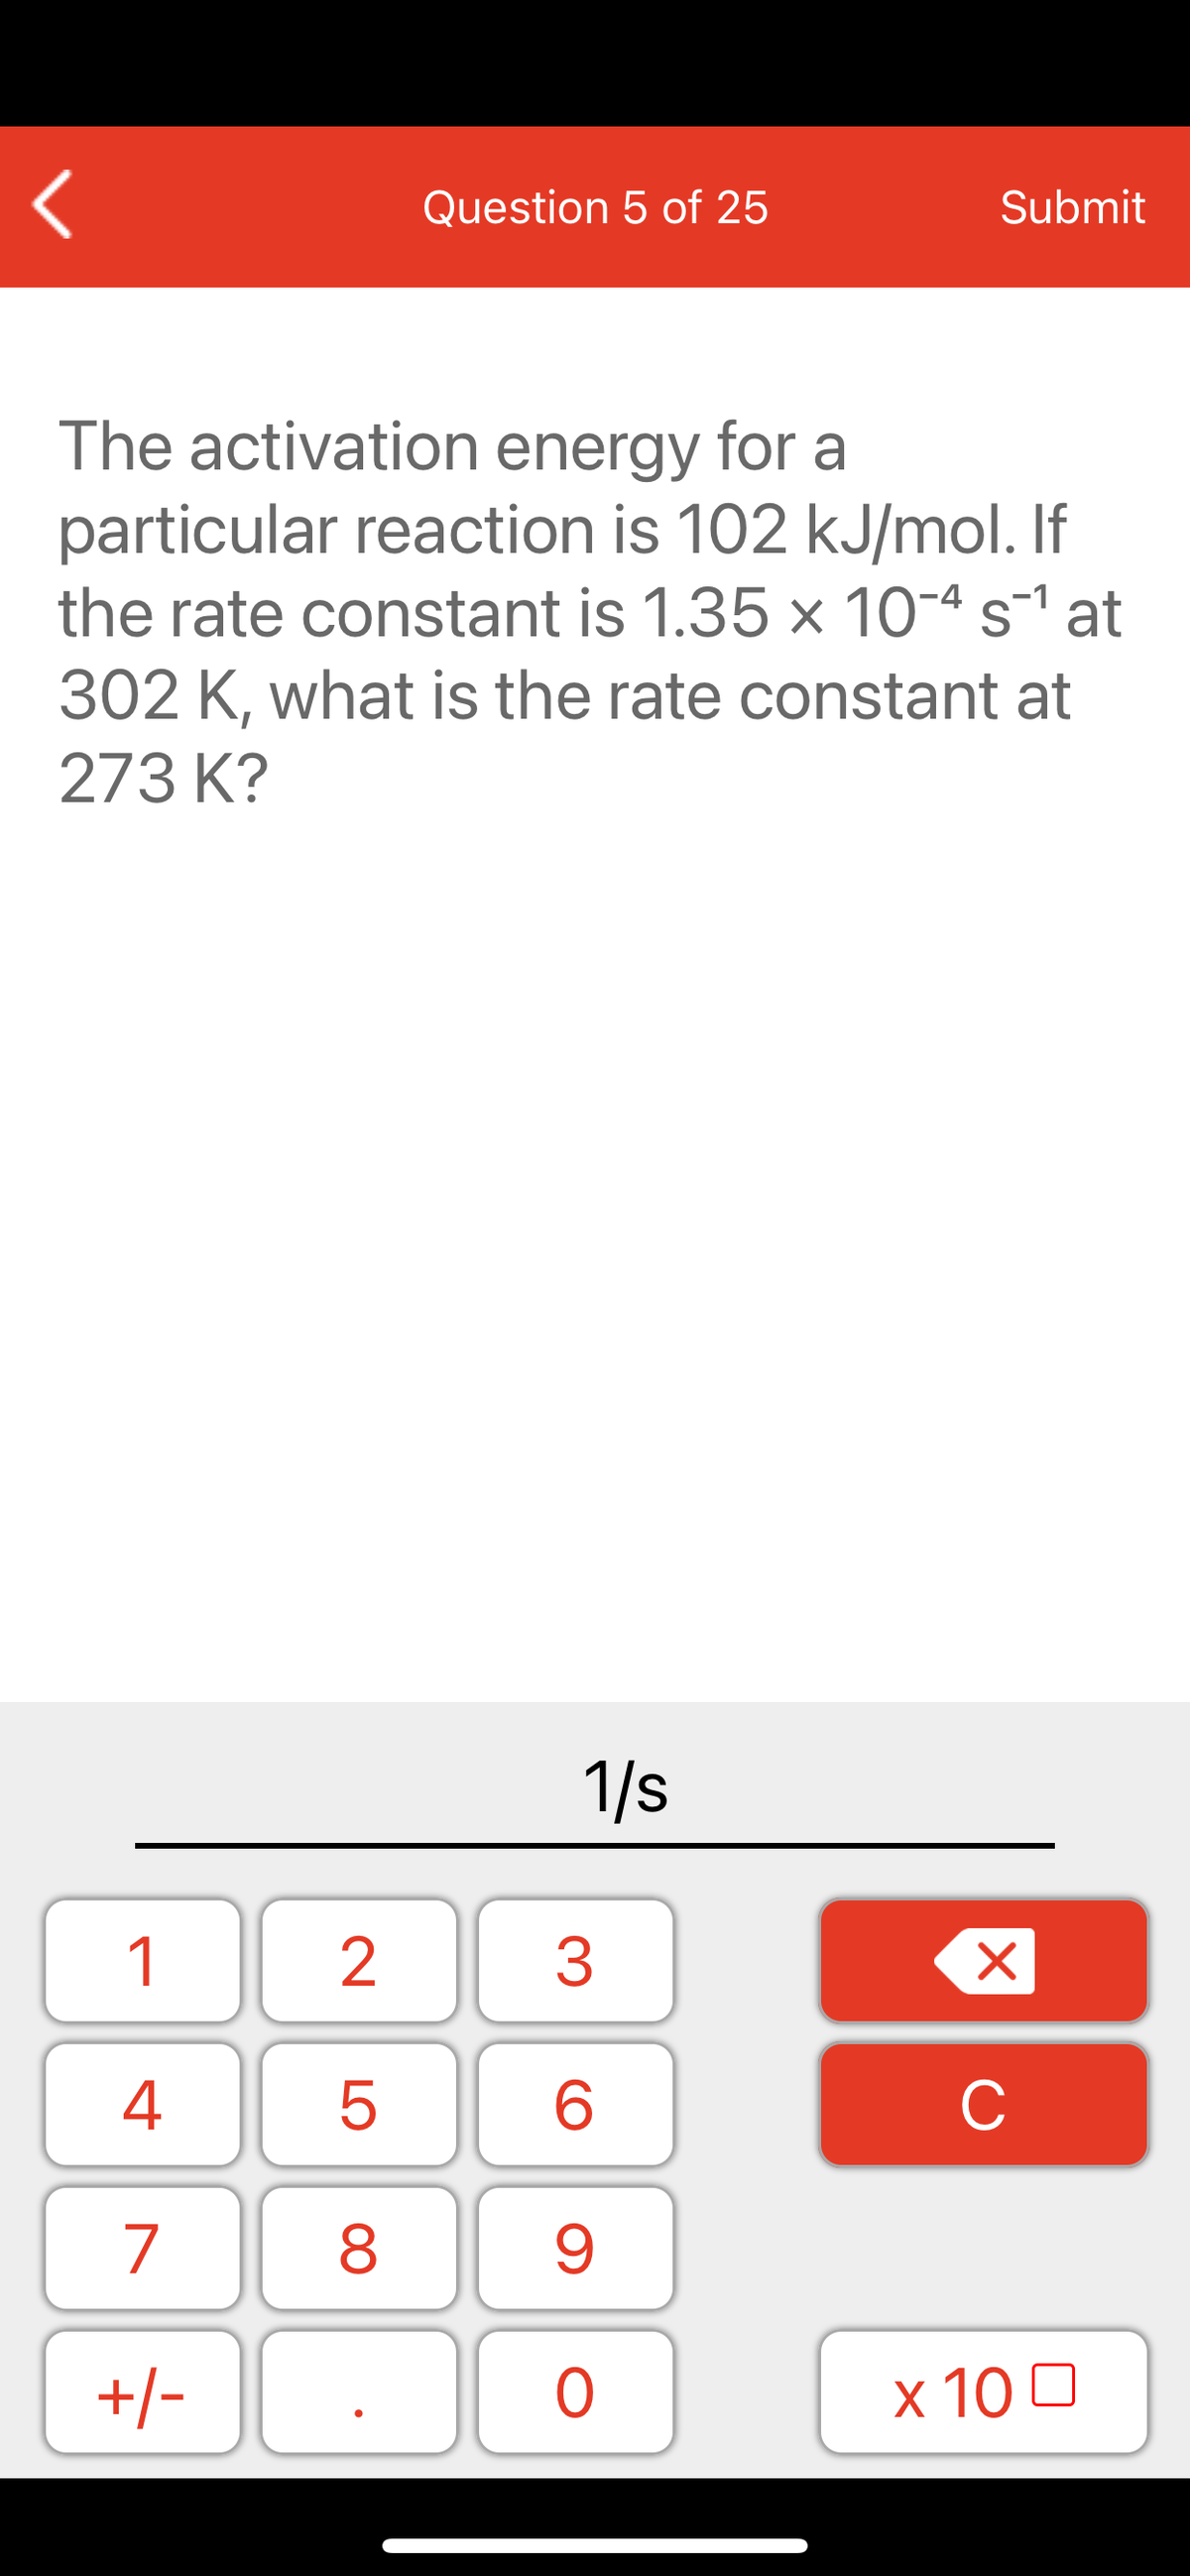 Question 5 of 25
Submit
The activation energy for a
particular reaction is 102 kJ/mol. If
the rate constant is 1.35 x 10-4 s-1 at
302 K, what is the rate constant at
273 K?
1/s
1
2
3
C
7
9.
+/-
x 10 0
LO
00
